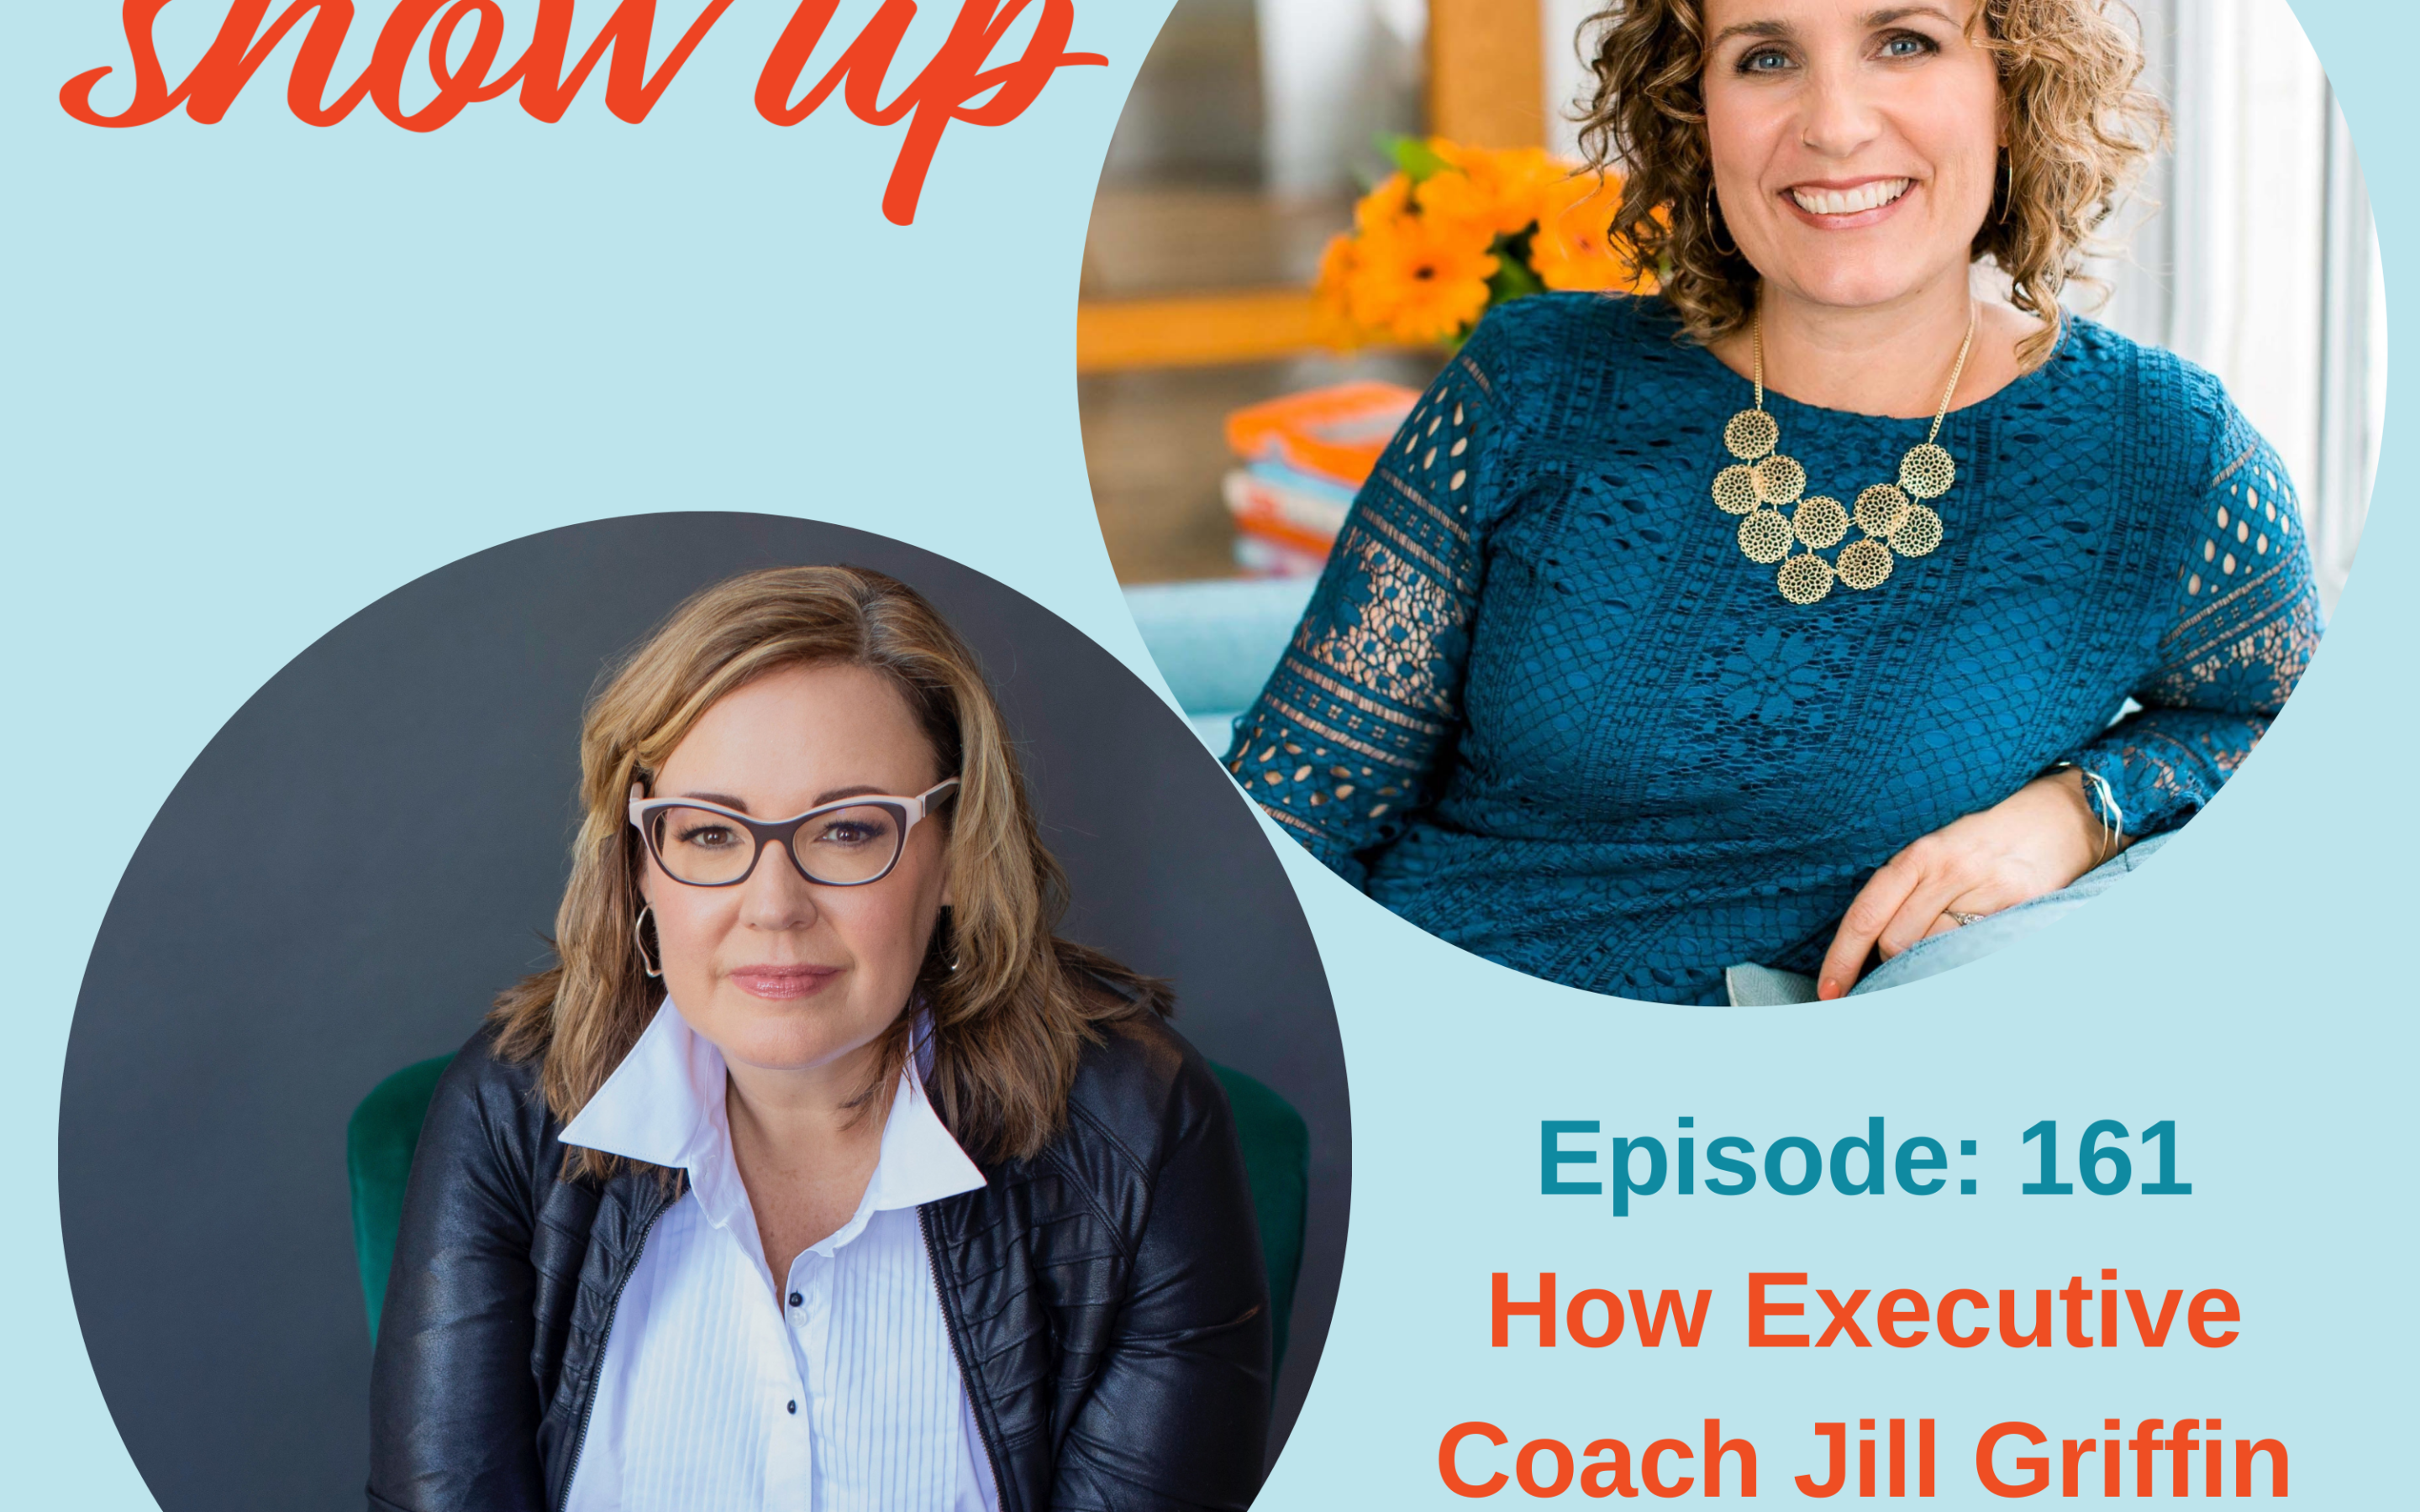 Ep #161: How Executive Coach Jill Griffin Makes a Powerful Impact Sharing Her Story